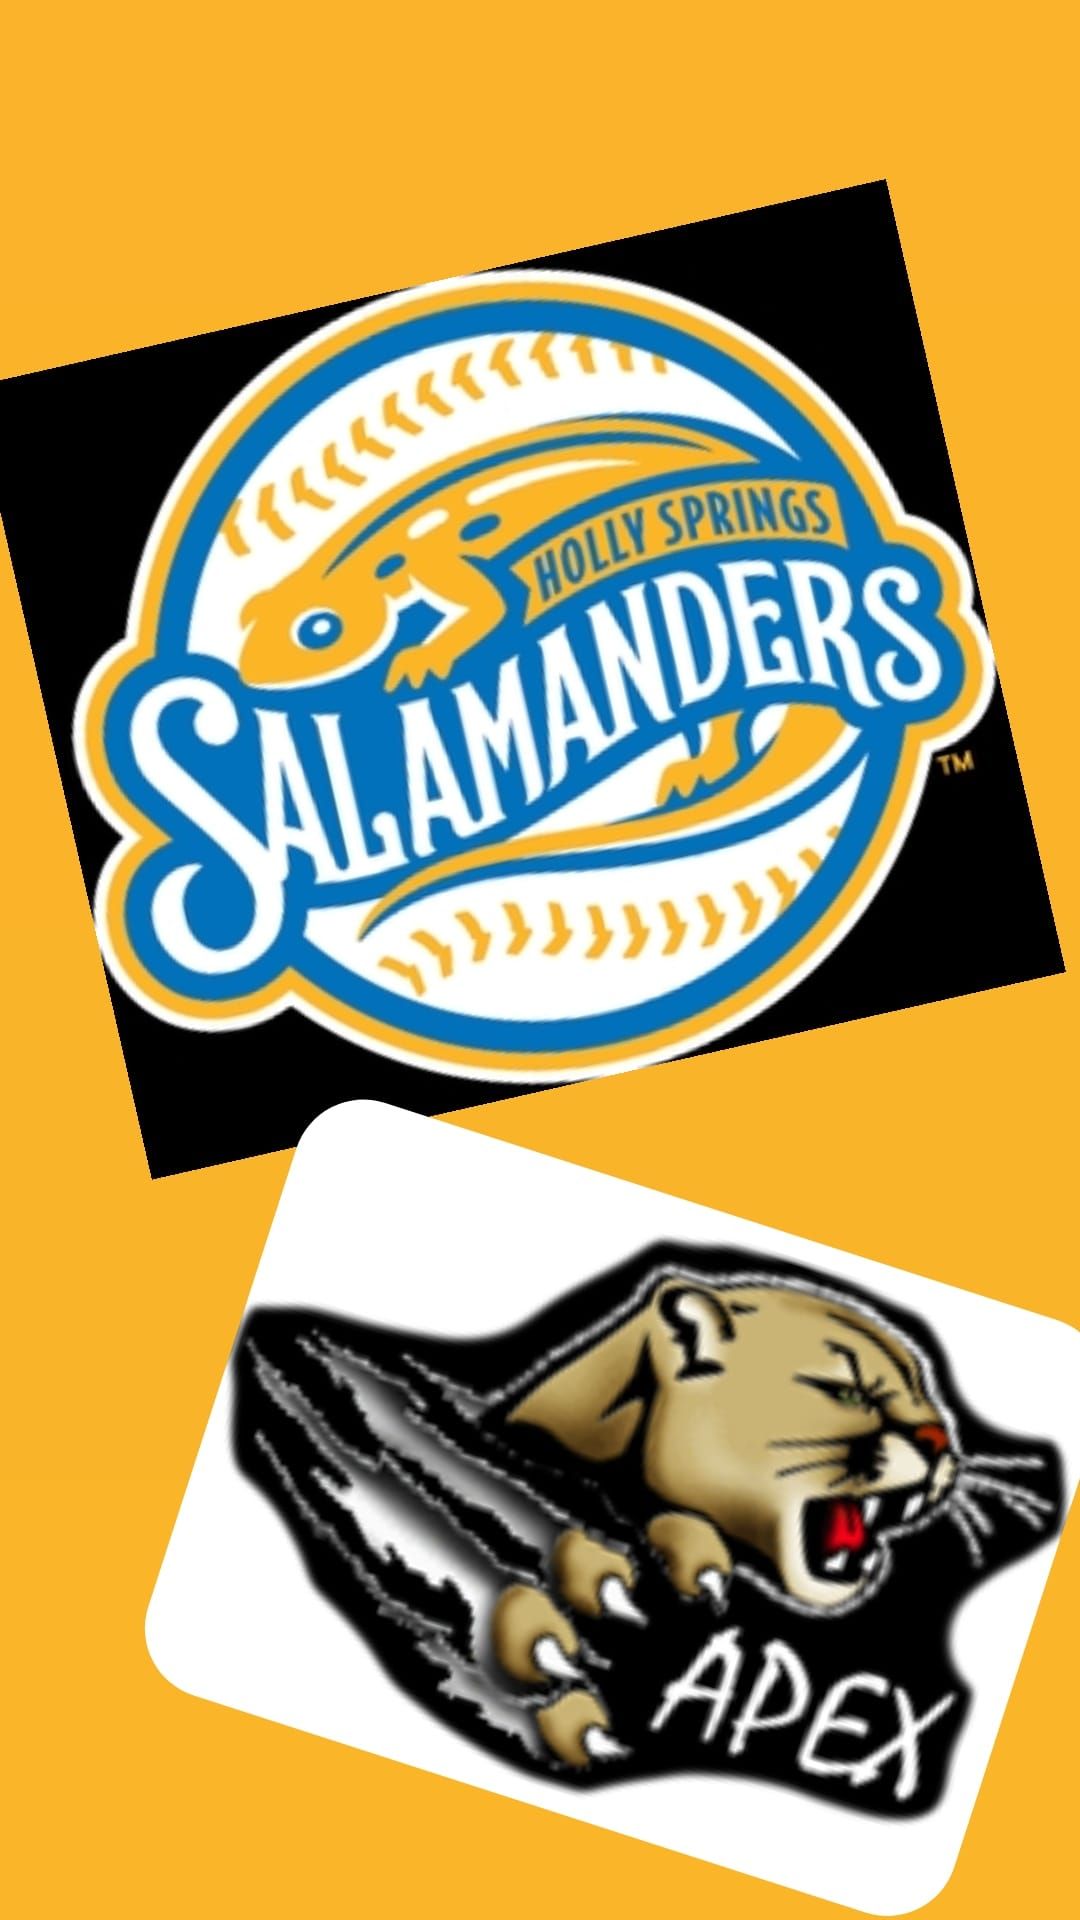 Family Night with Holly Springs Salamanders